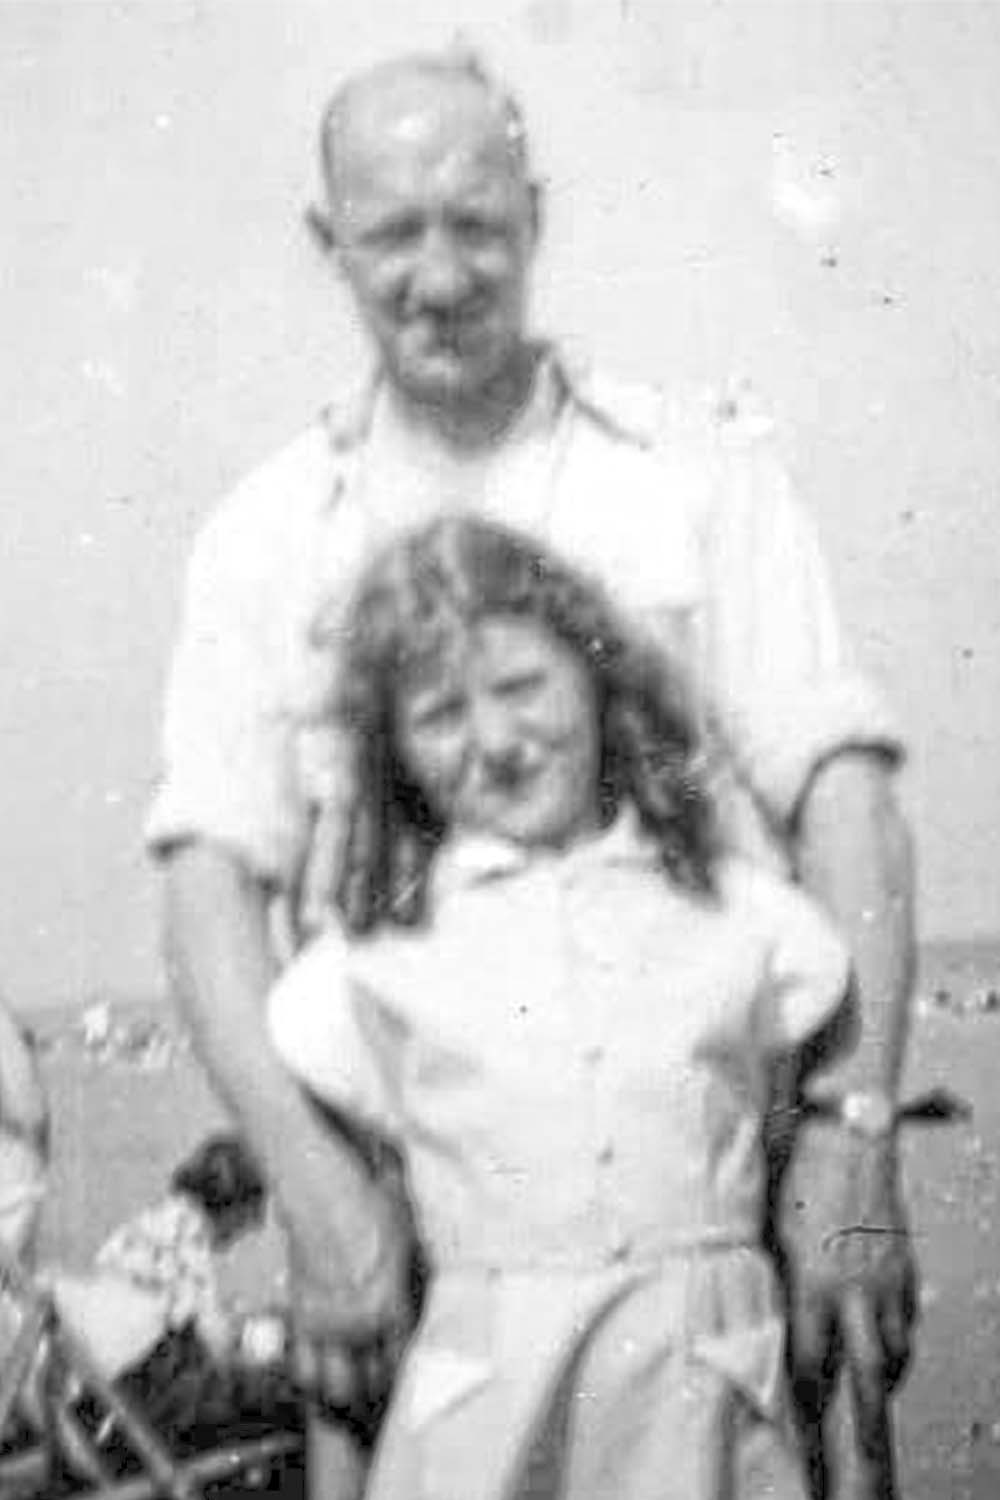 A father and a daughter at Ramsgate beach, a traditional East End seaside destination